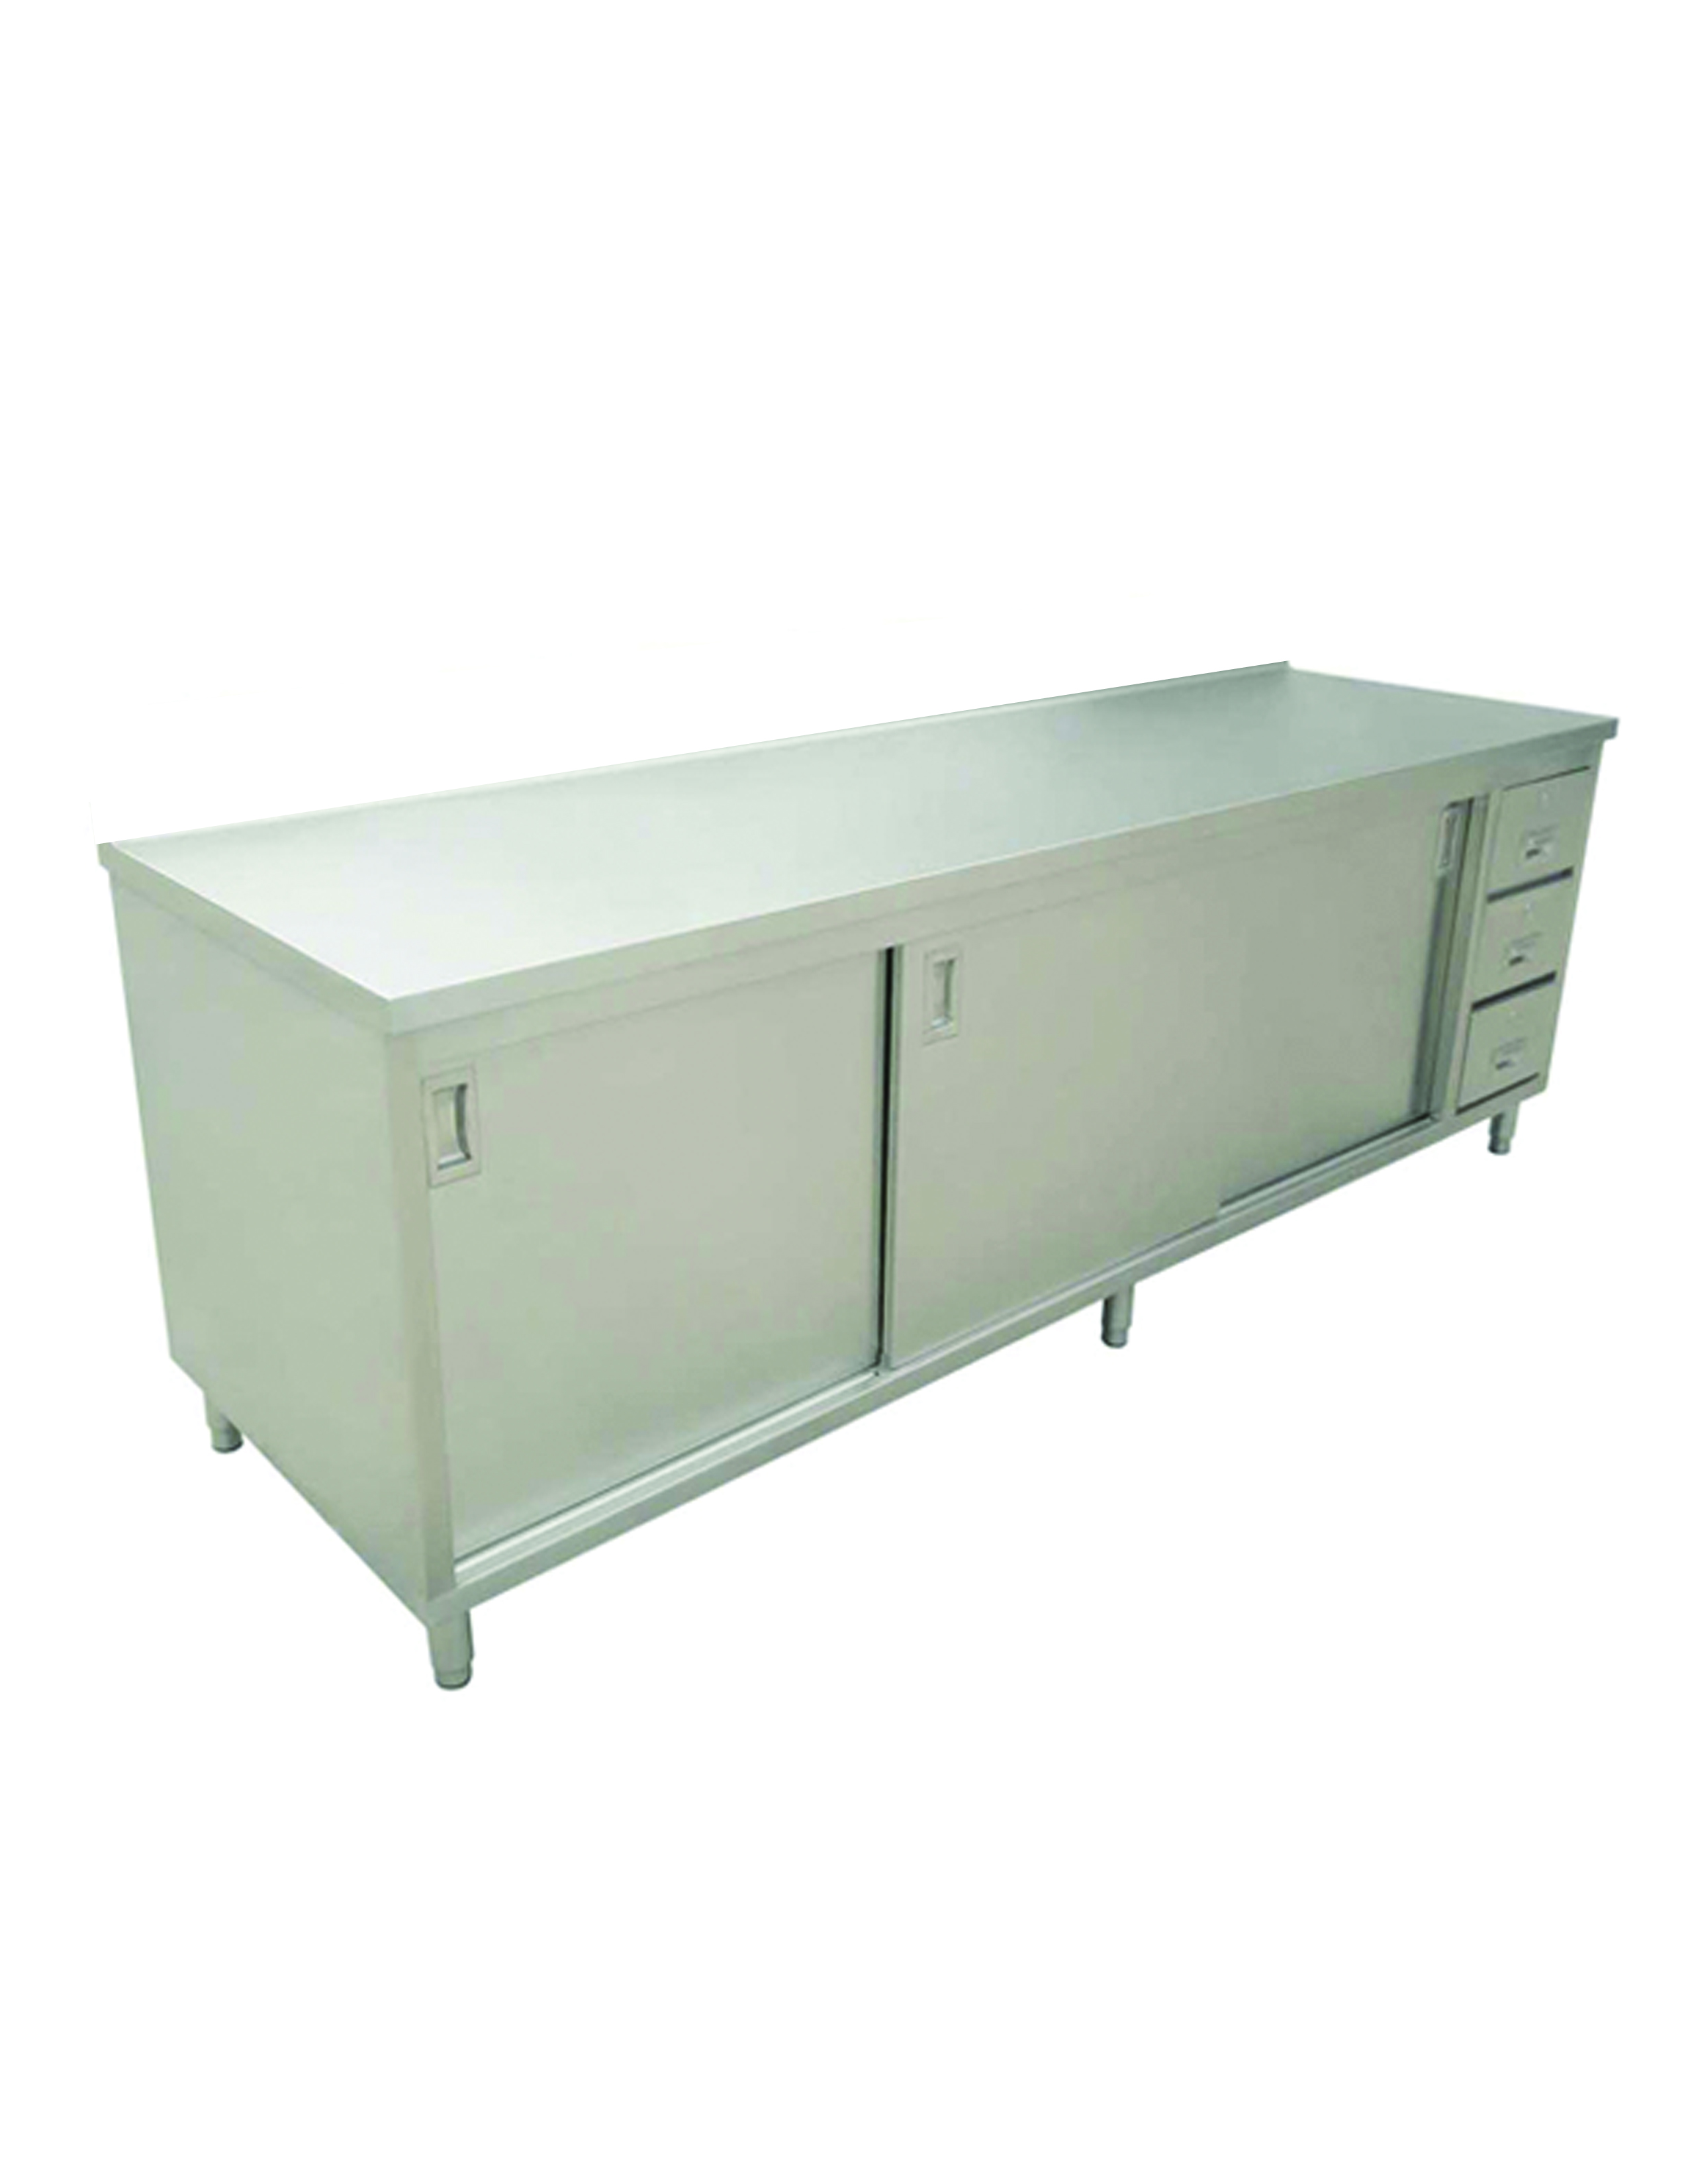 Details about   48 x 25 Stainless Steel 1 Drawer Cabinet work table countertop prep bench 